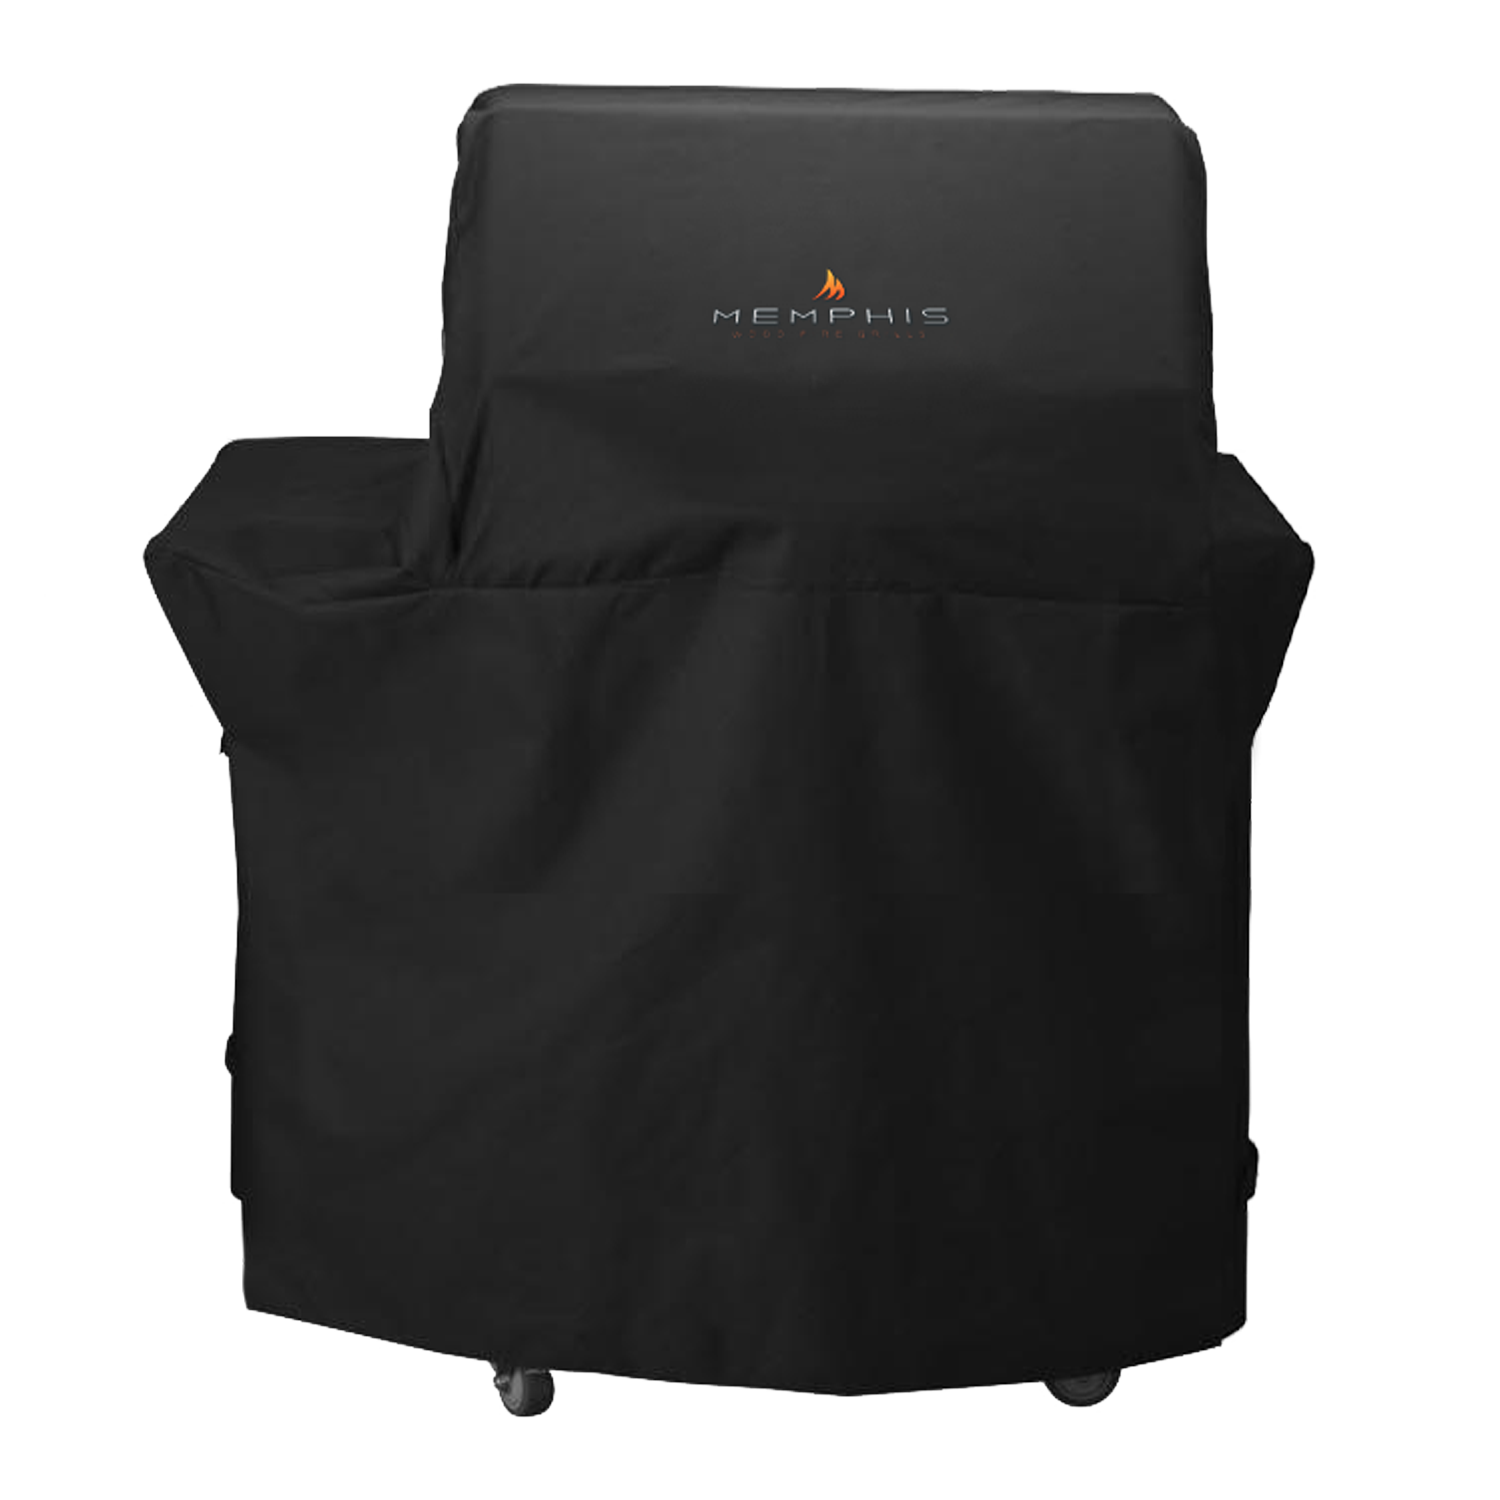 Memphis 43" Kit 2 Black Polyester Grill Cover for Elevate Cart ITC2 Pellet Grill